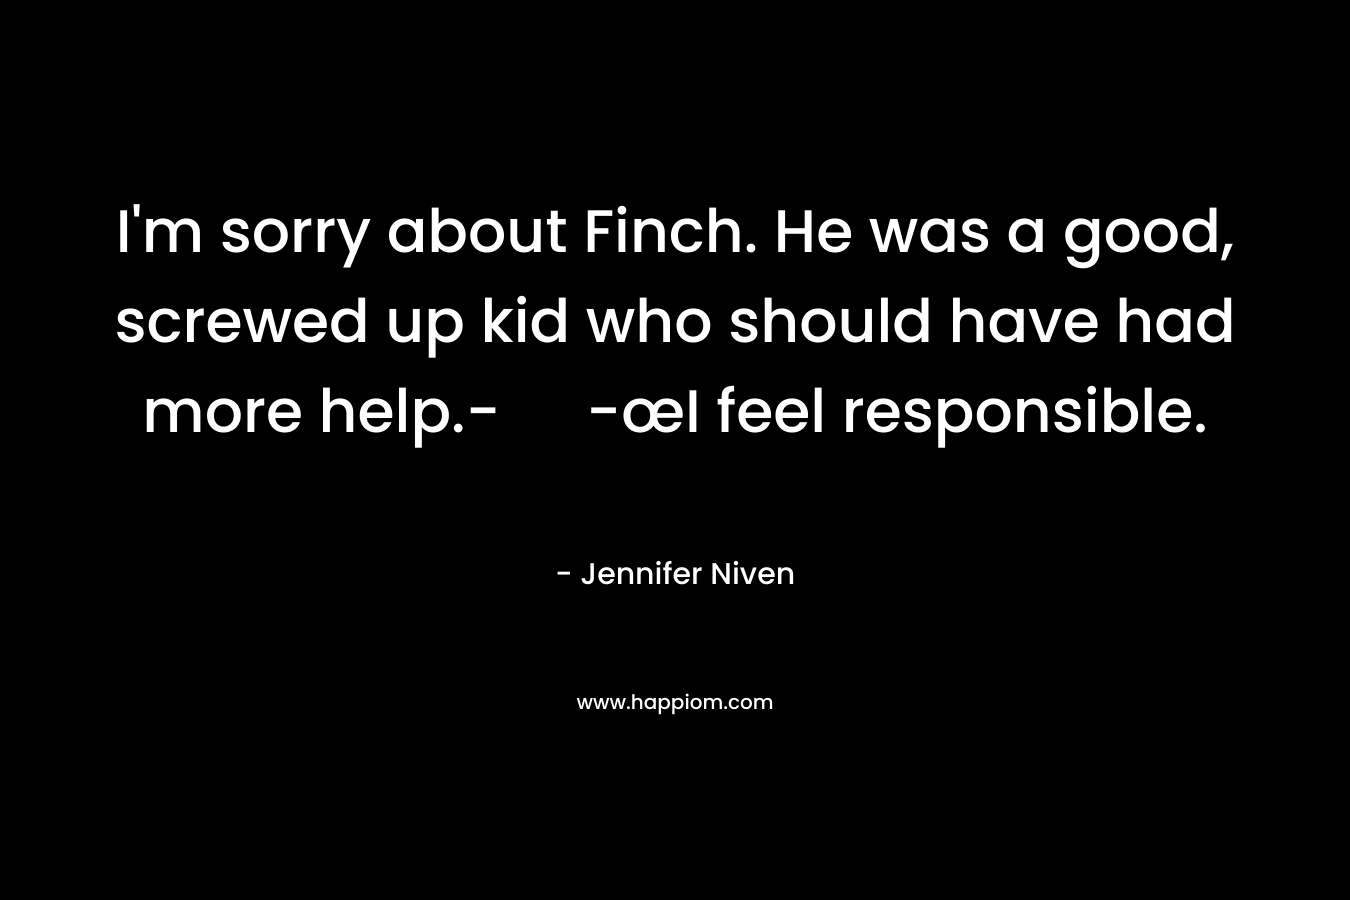 I'm sorry about Finch. He was a good, screwed up kid who should have had more help.- -œI feel responsible.